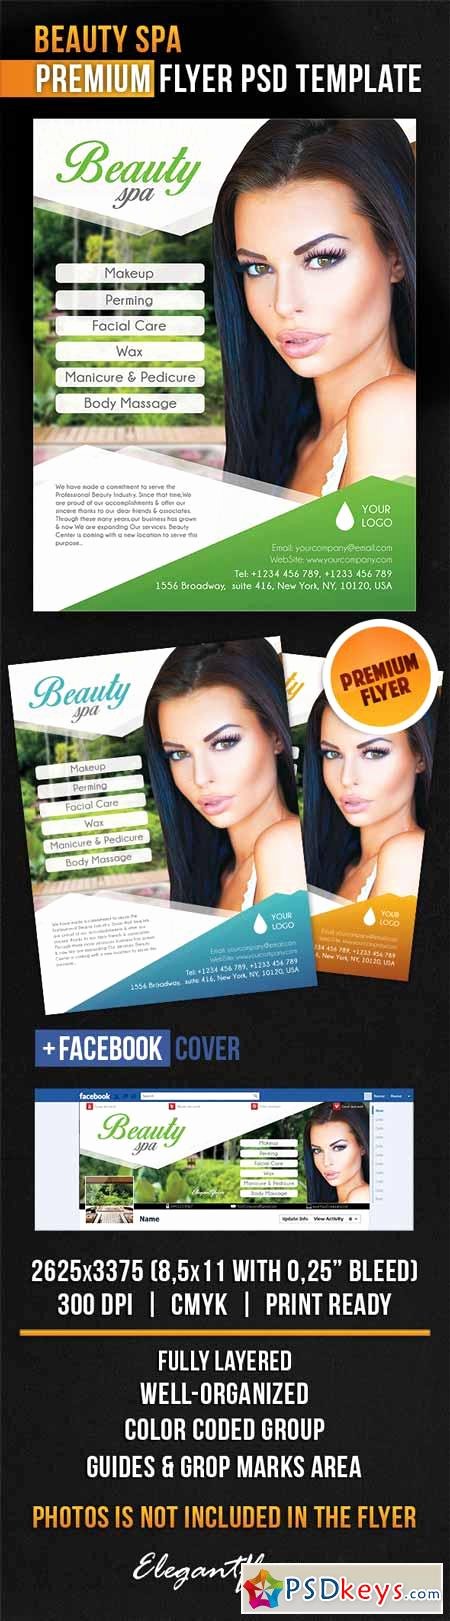 Beauty Spa – Flyer Psd Template Cover Free